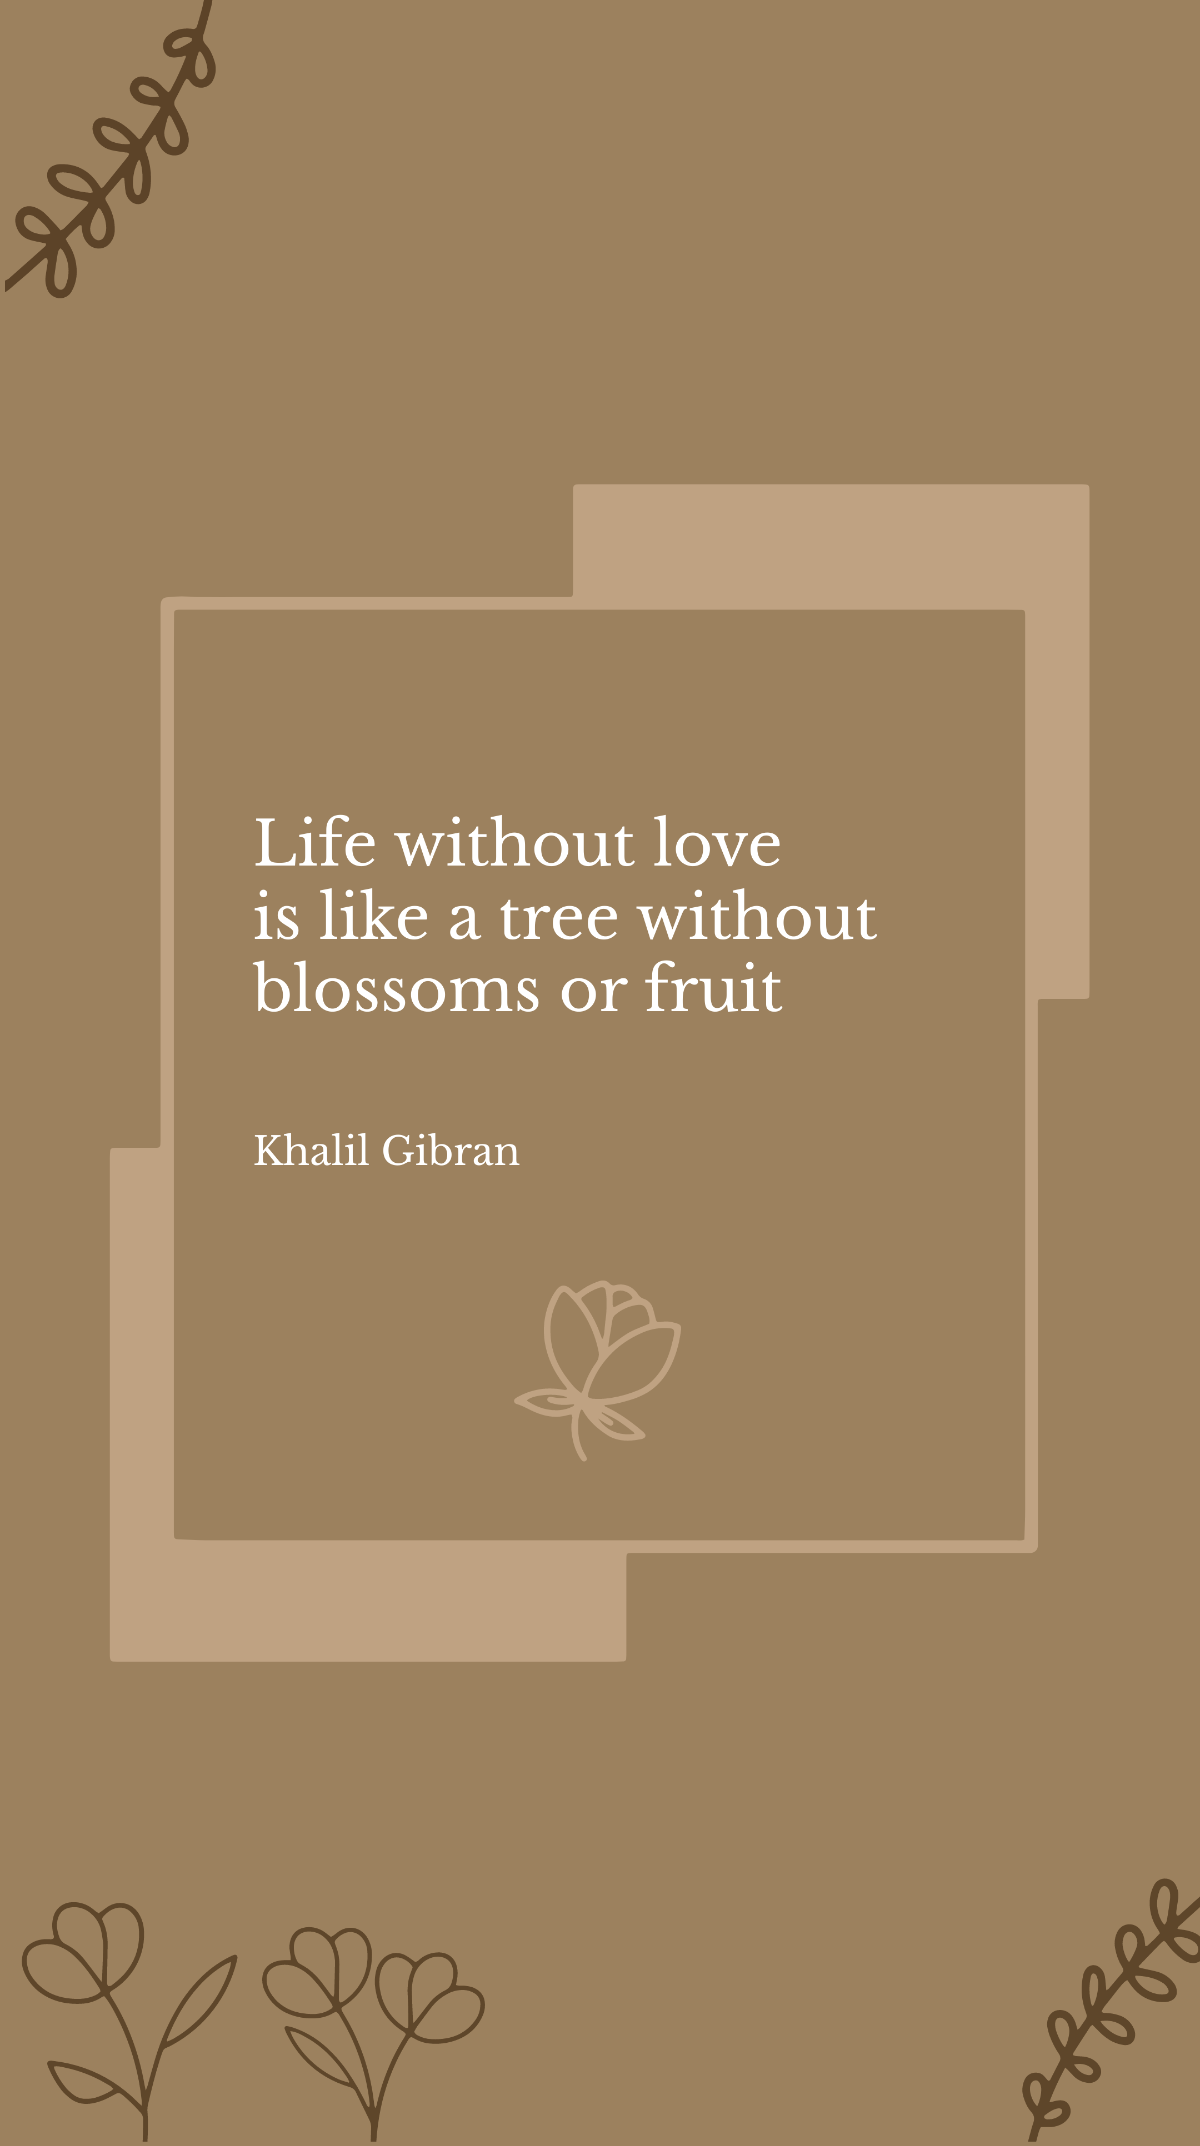 Khalil Gibran - Life without love is like a tree without blossoms or fruit Template